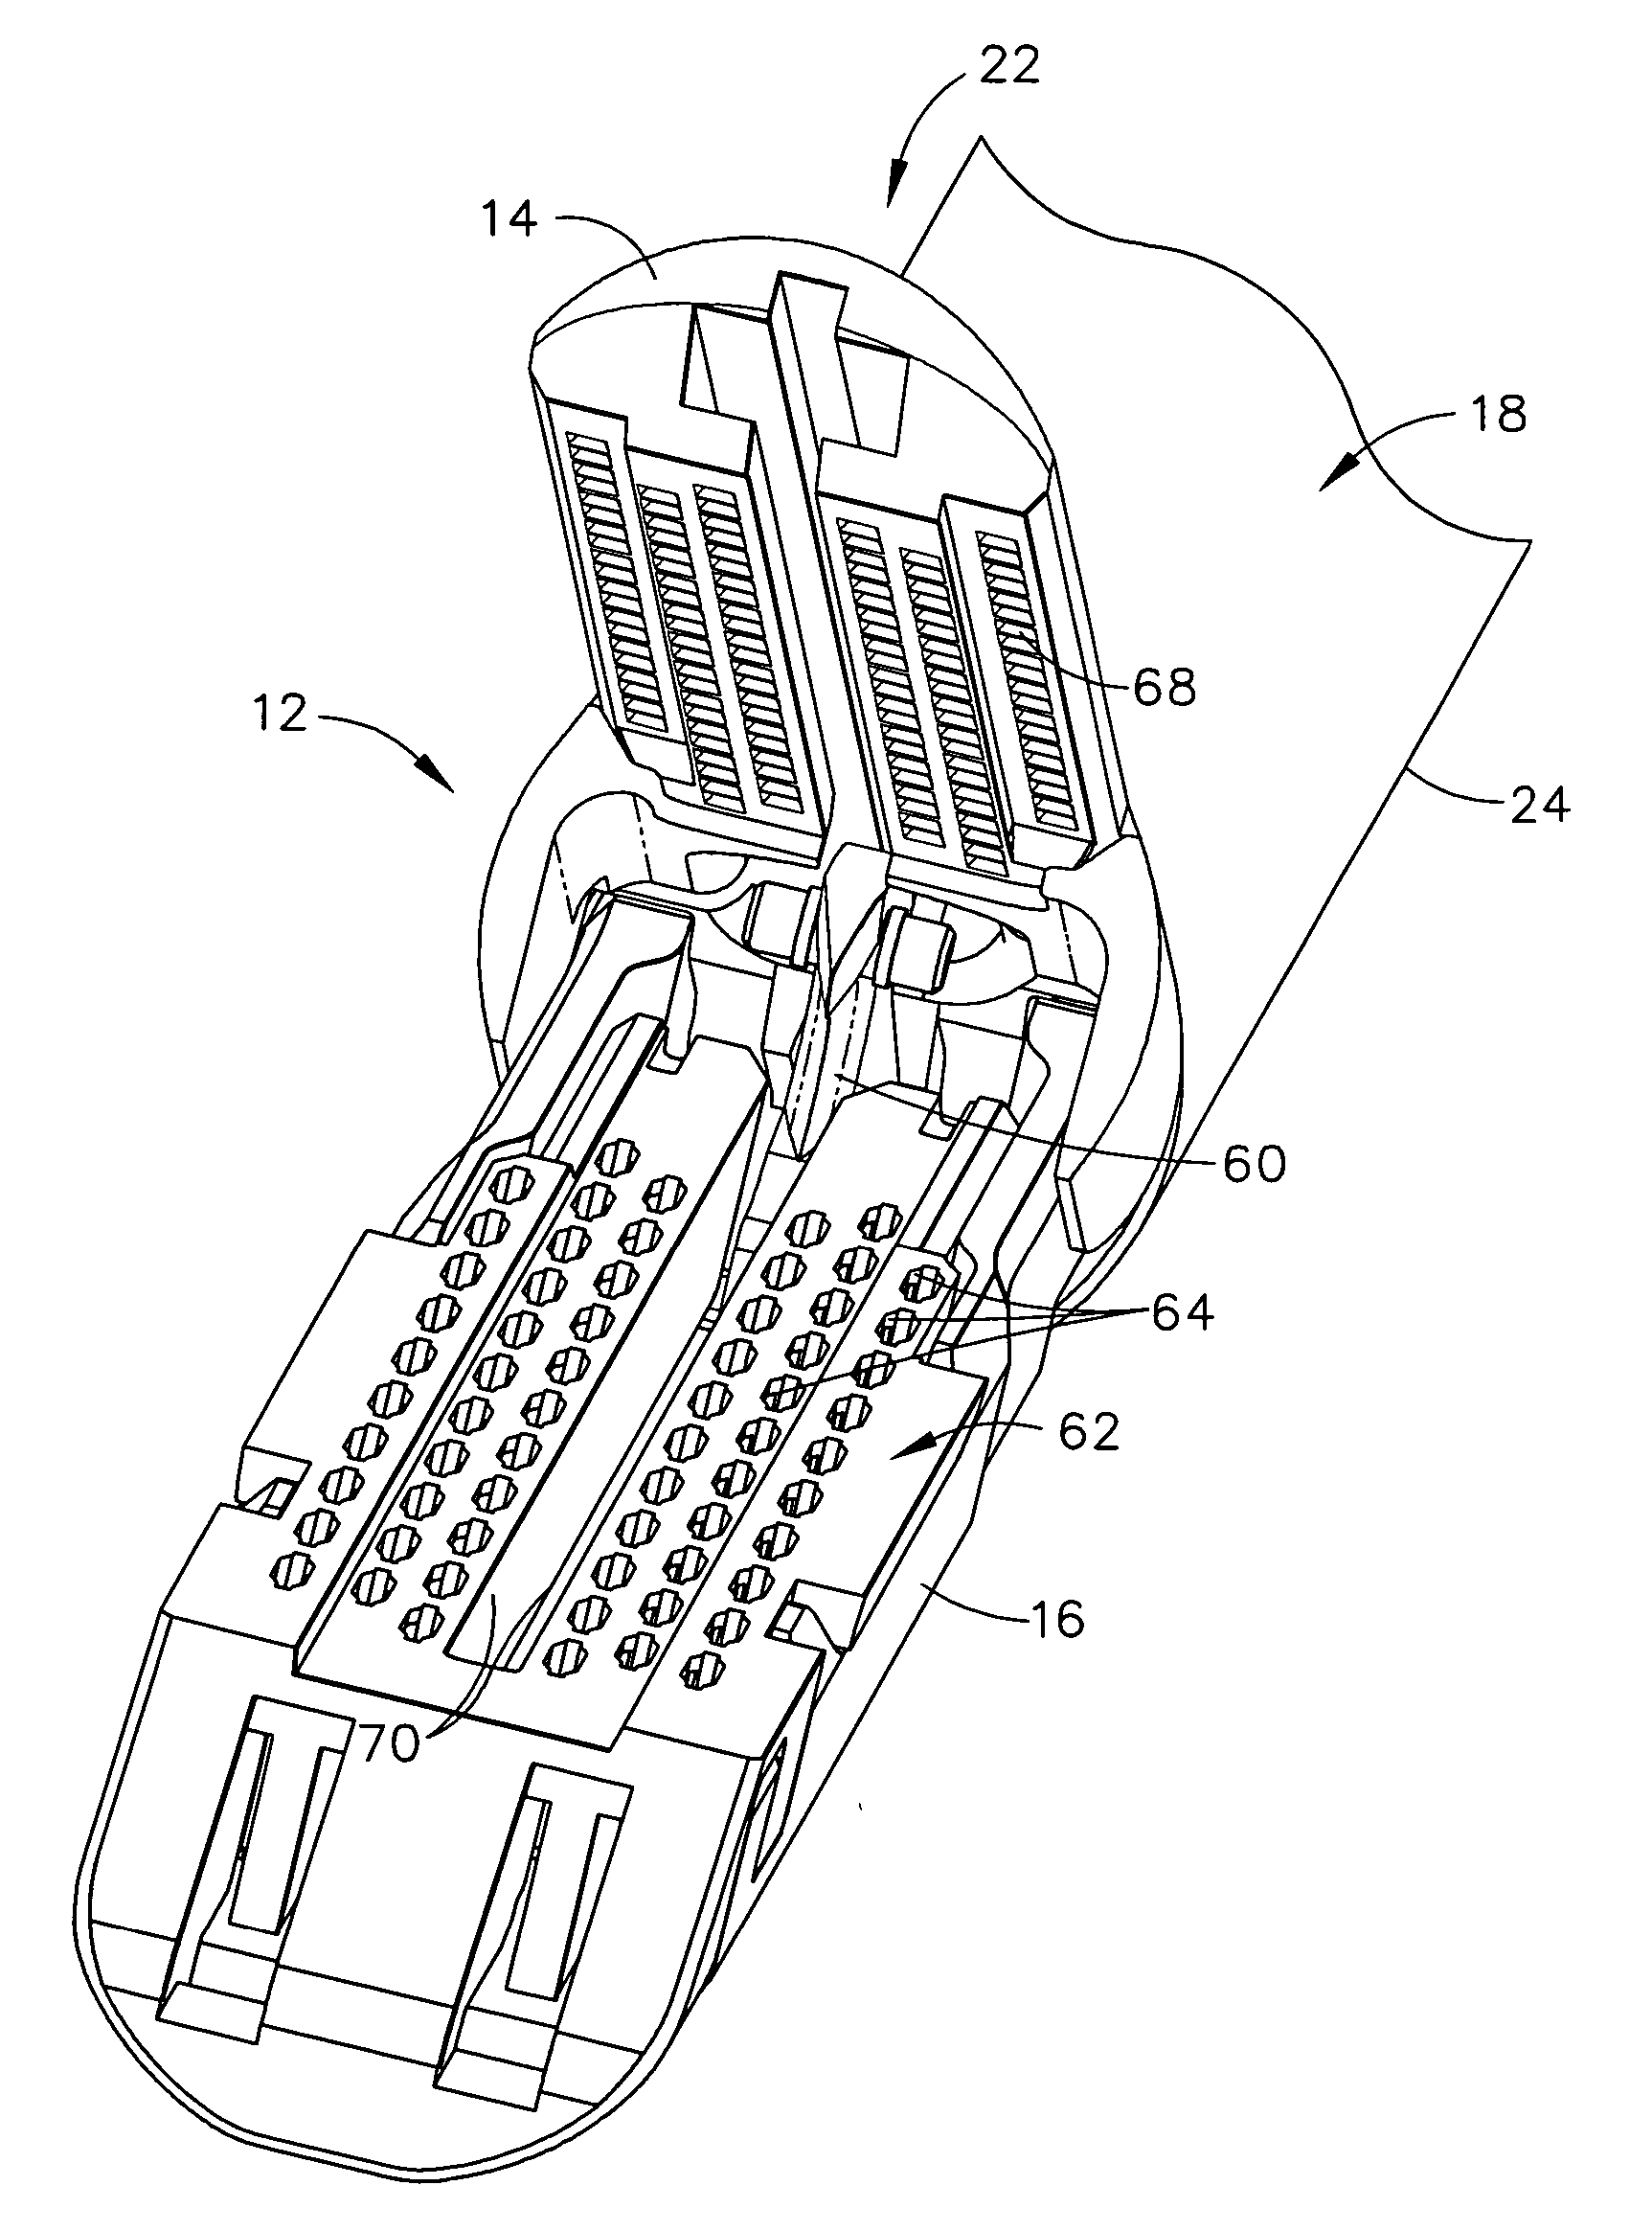 Surgical stapling instrument incorporating a multistroke firing mechanism having a rotary slip-clutch transmission